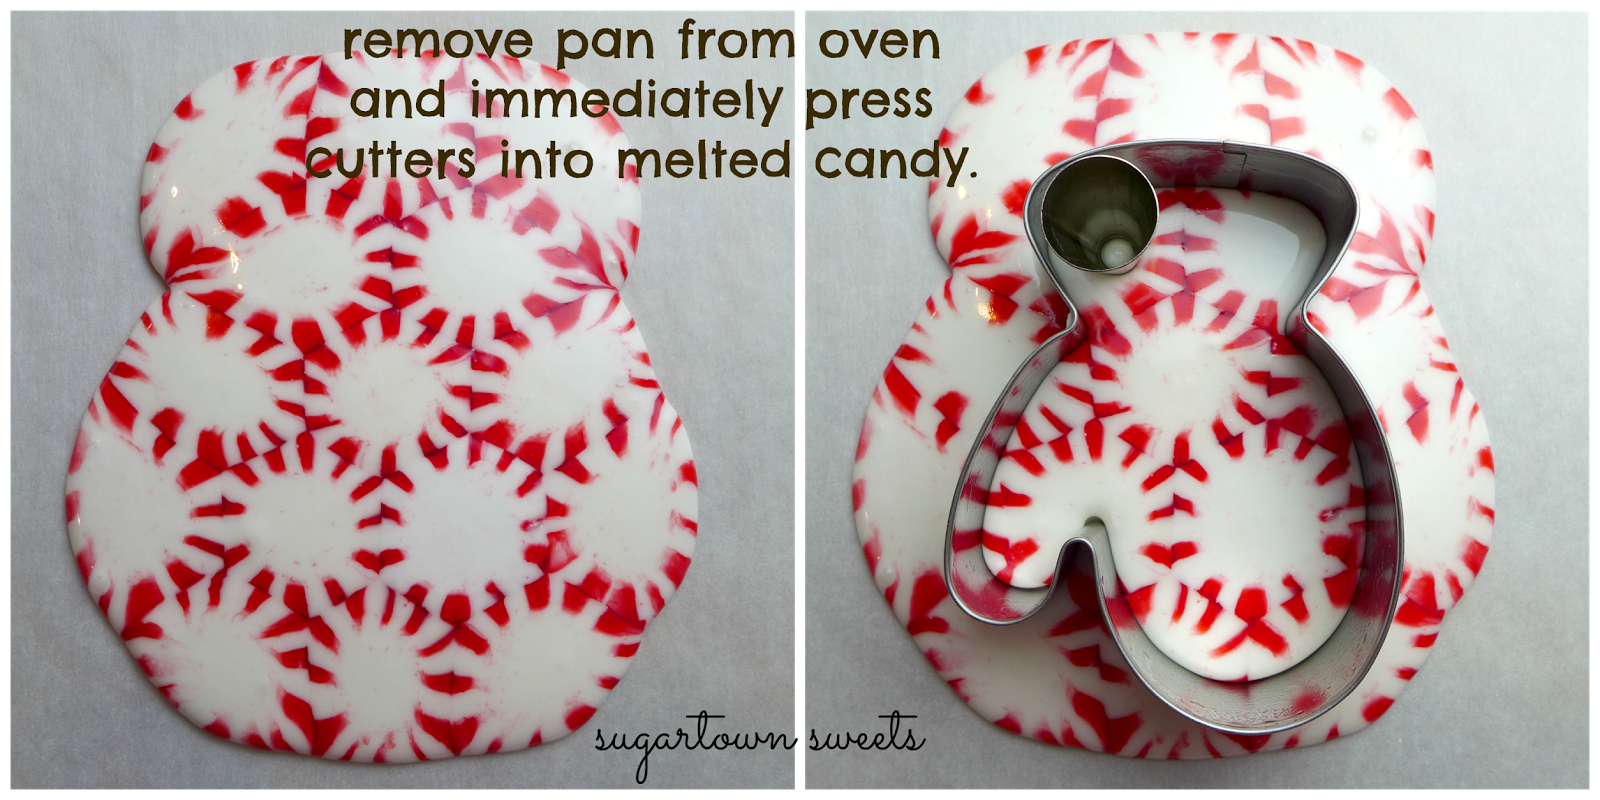 Peppermint Christmas Candy